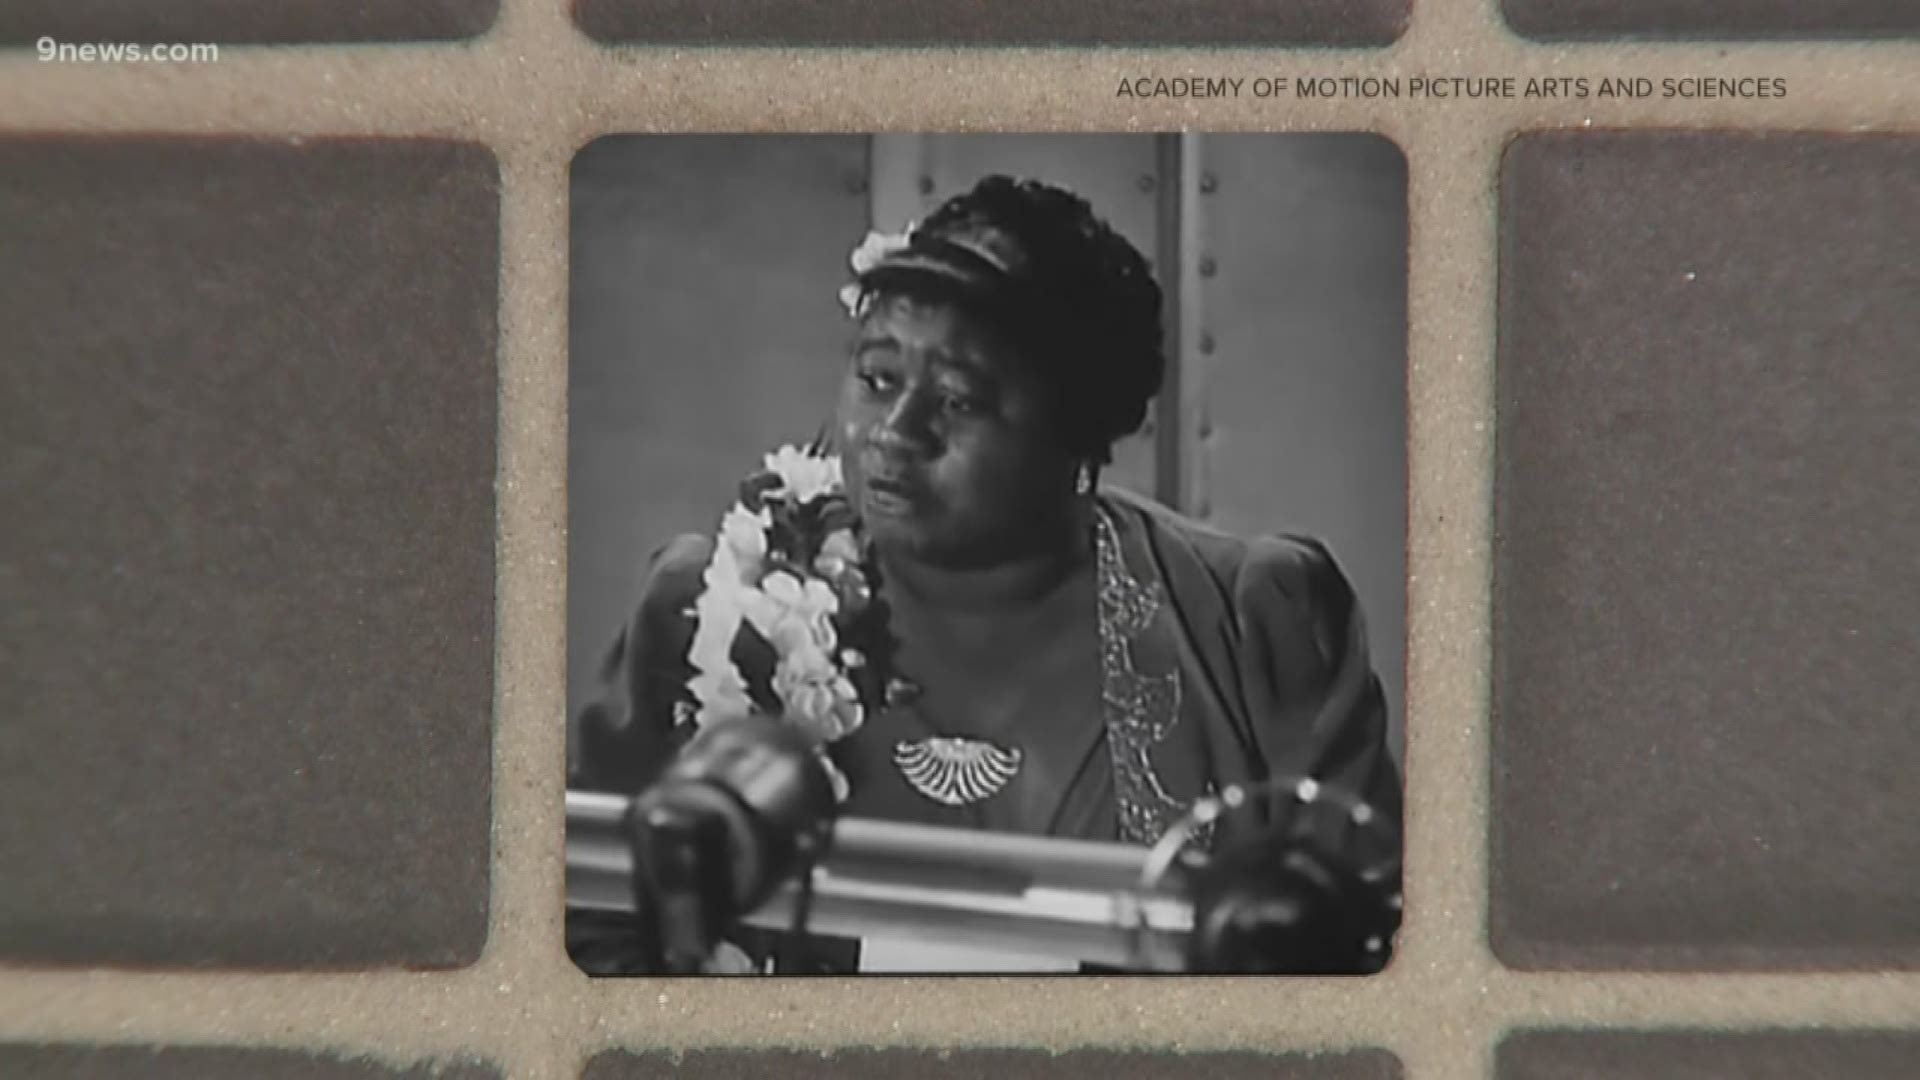 Hattie McDaniel called Denver home and left East High School, where she made it in Hollywood.